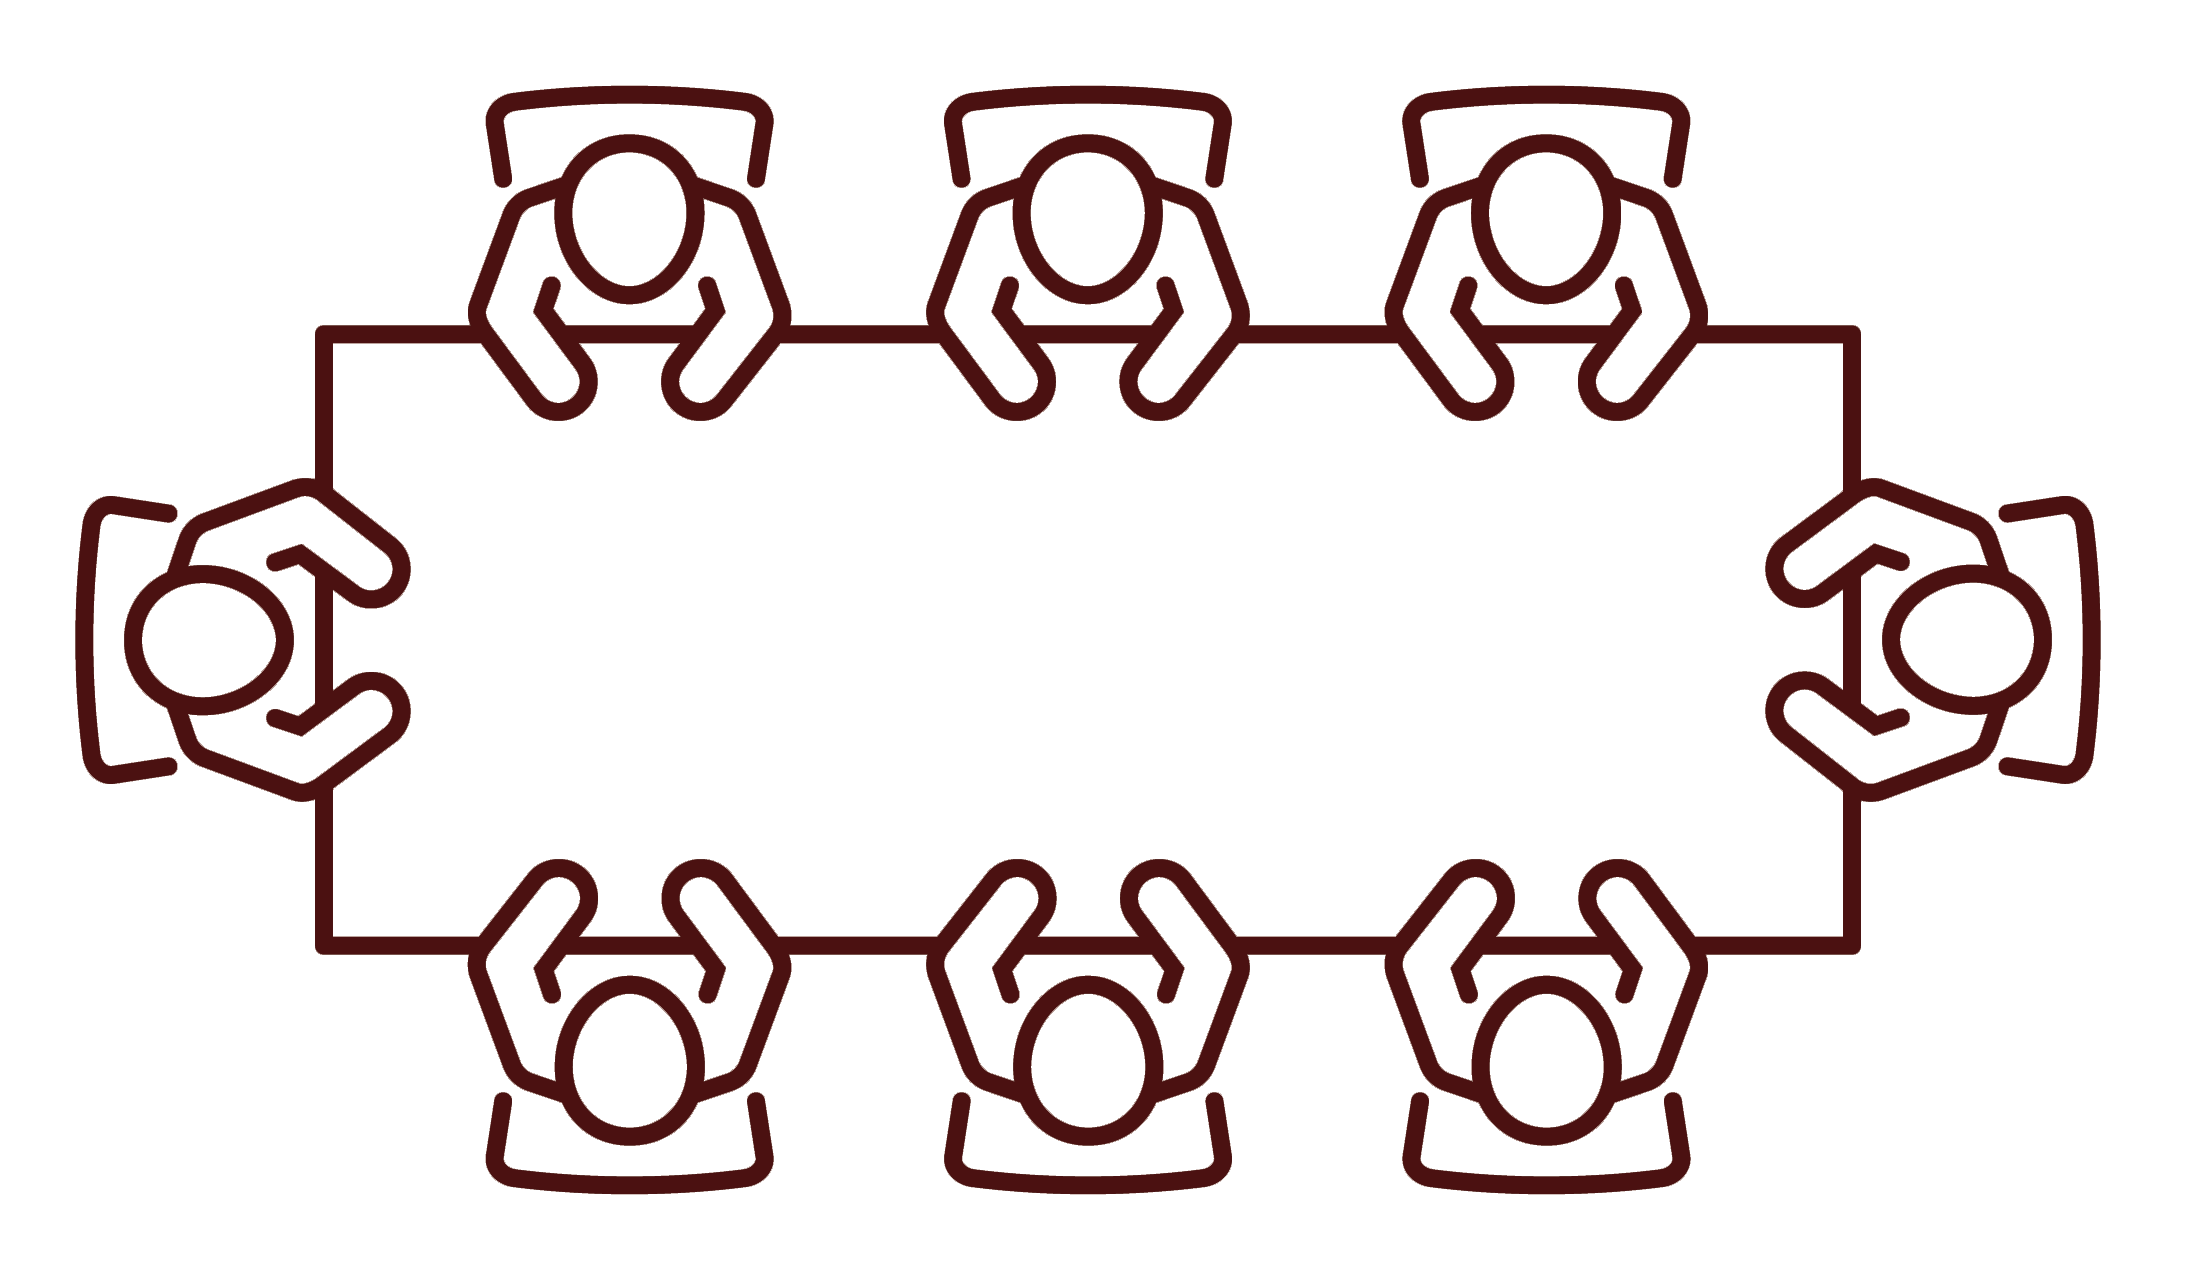 Abstract icon representation of 8 individuals sitting around a meeting table in a discussion